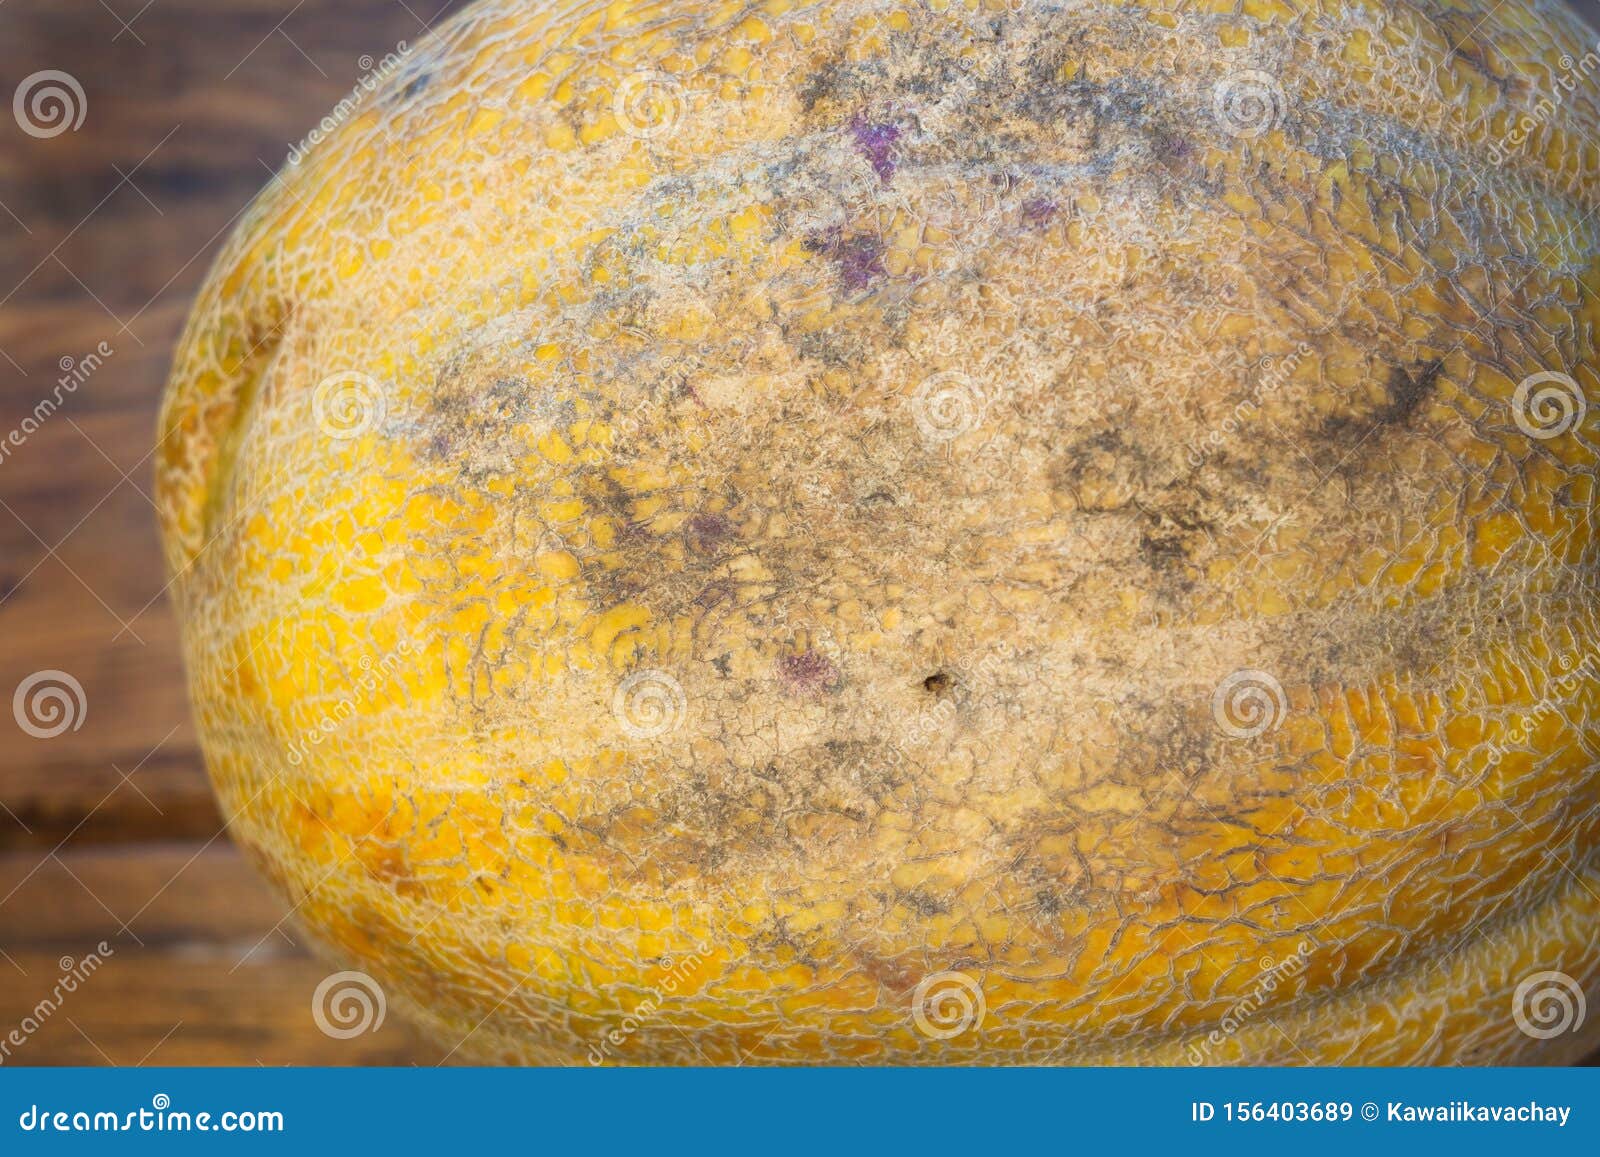 ugly d melon with scar-like structure, scratch on white background